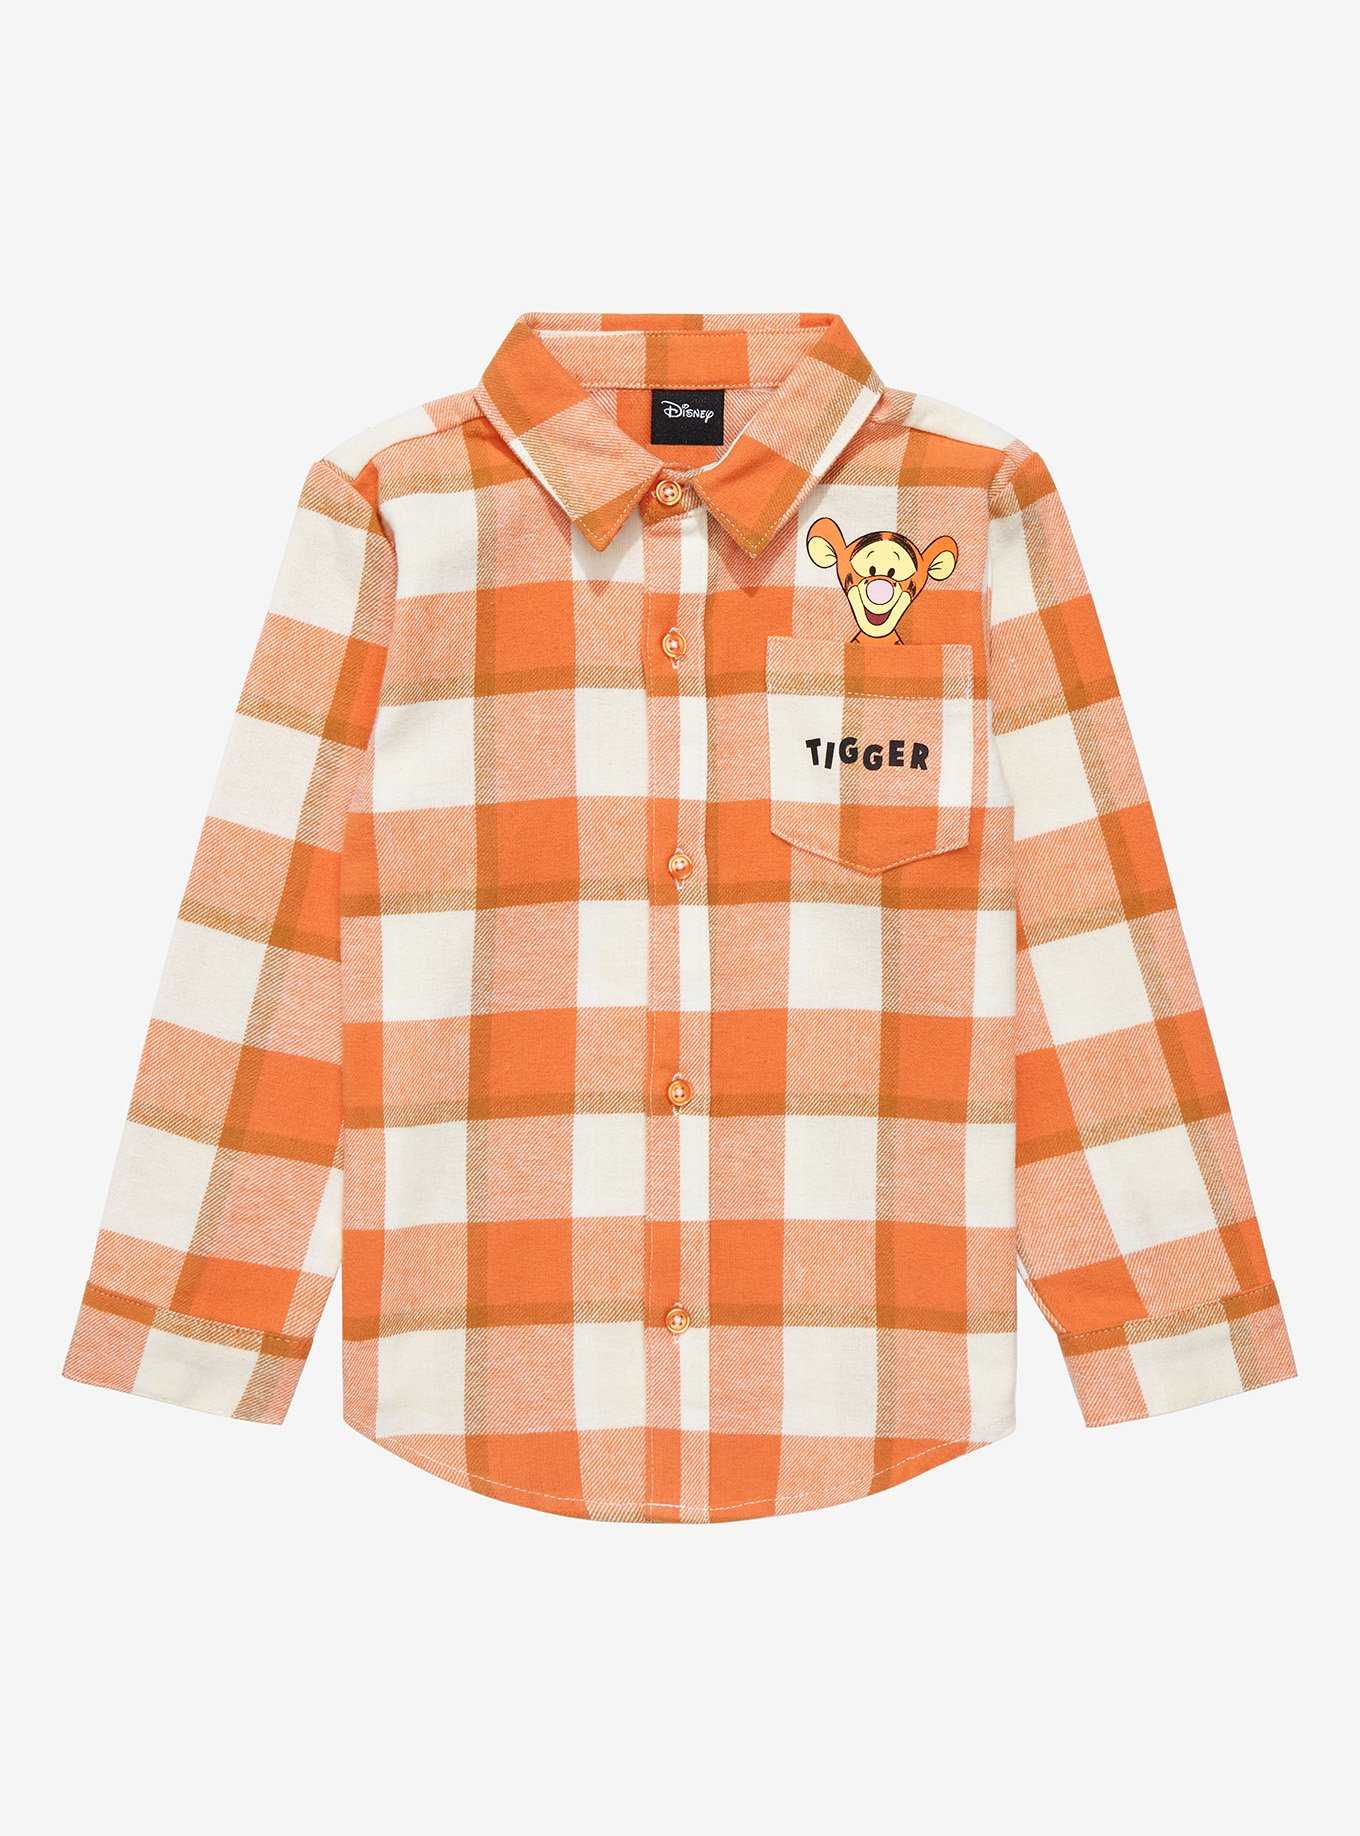 Disney Winnie the Pooh Chibi Tigger Toddler Flannel - BoxLunch Exclusive, , hi-res